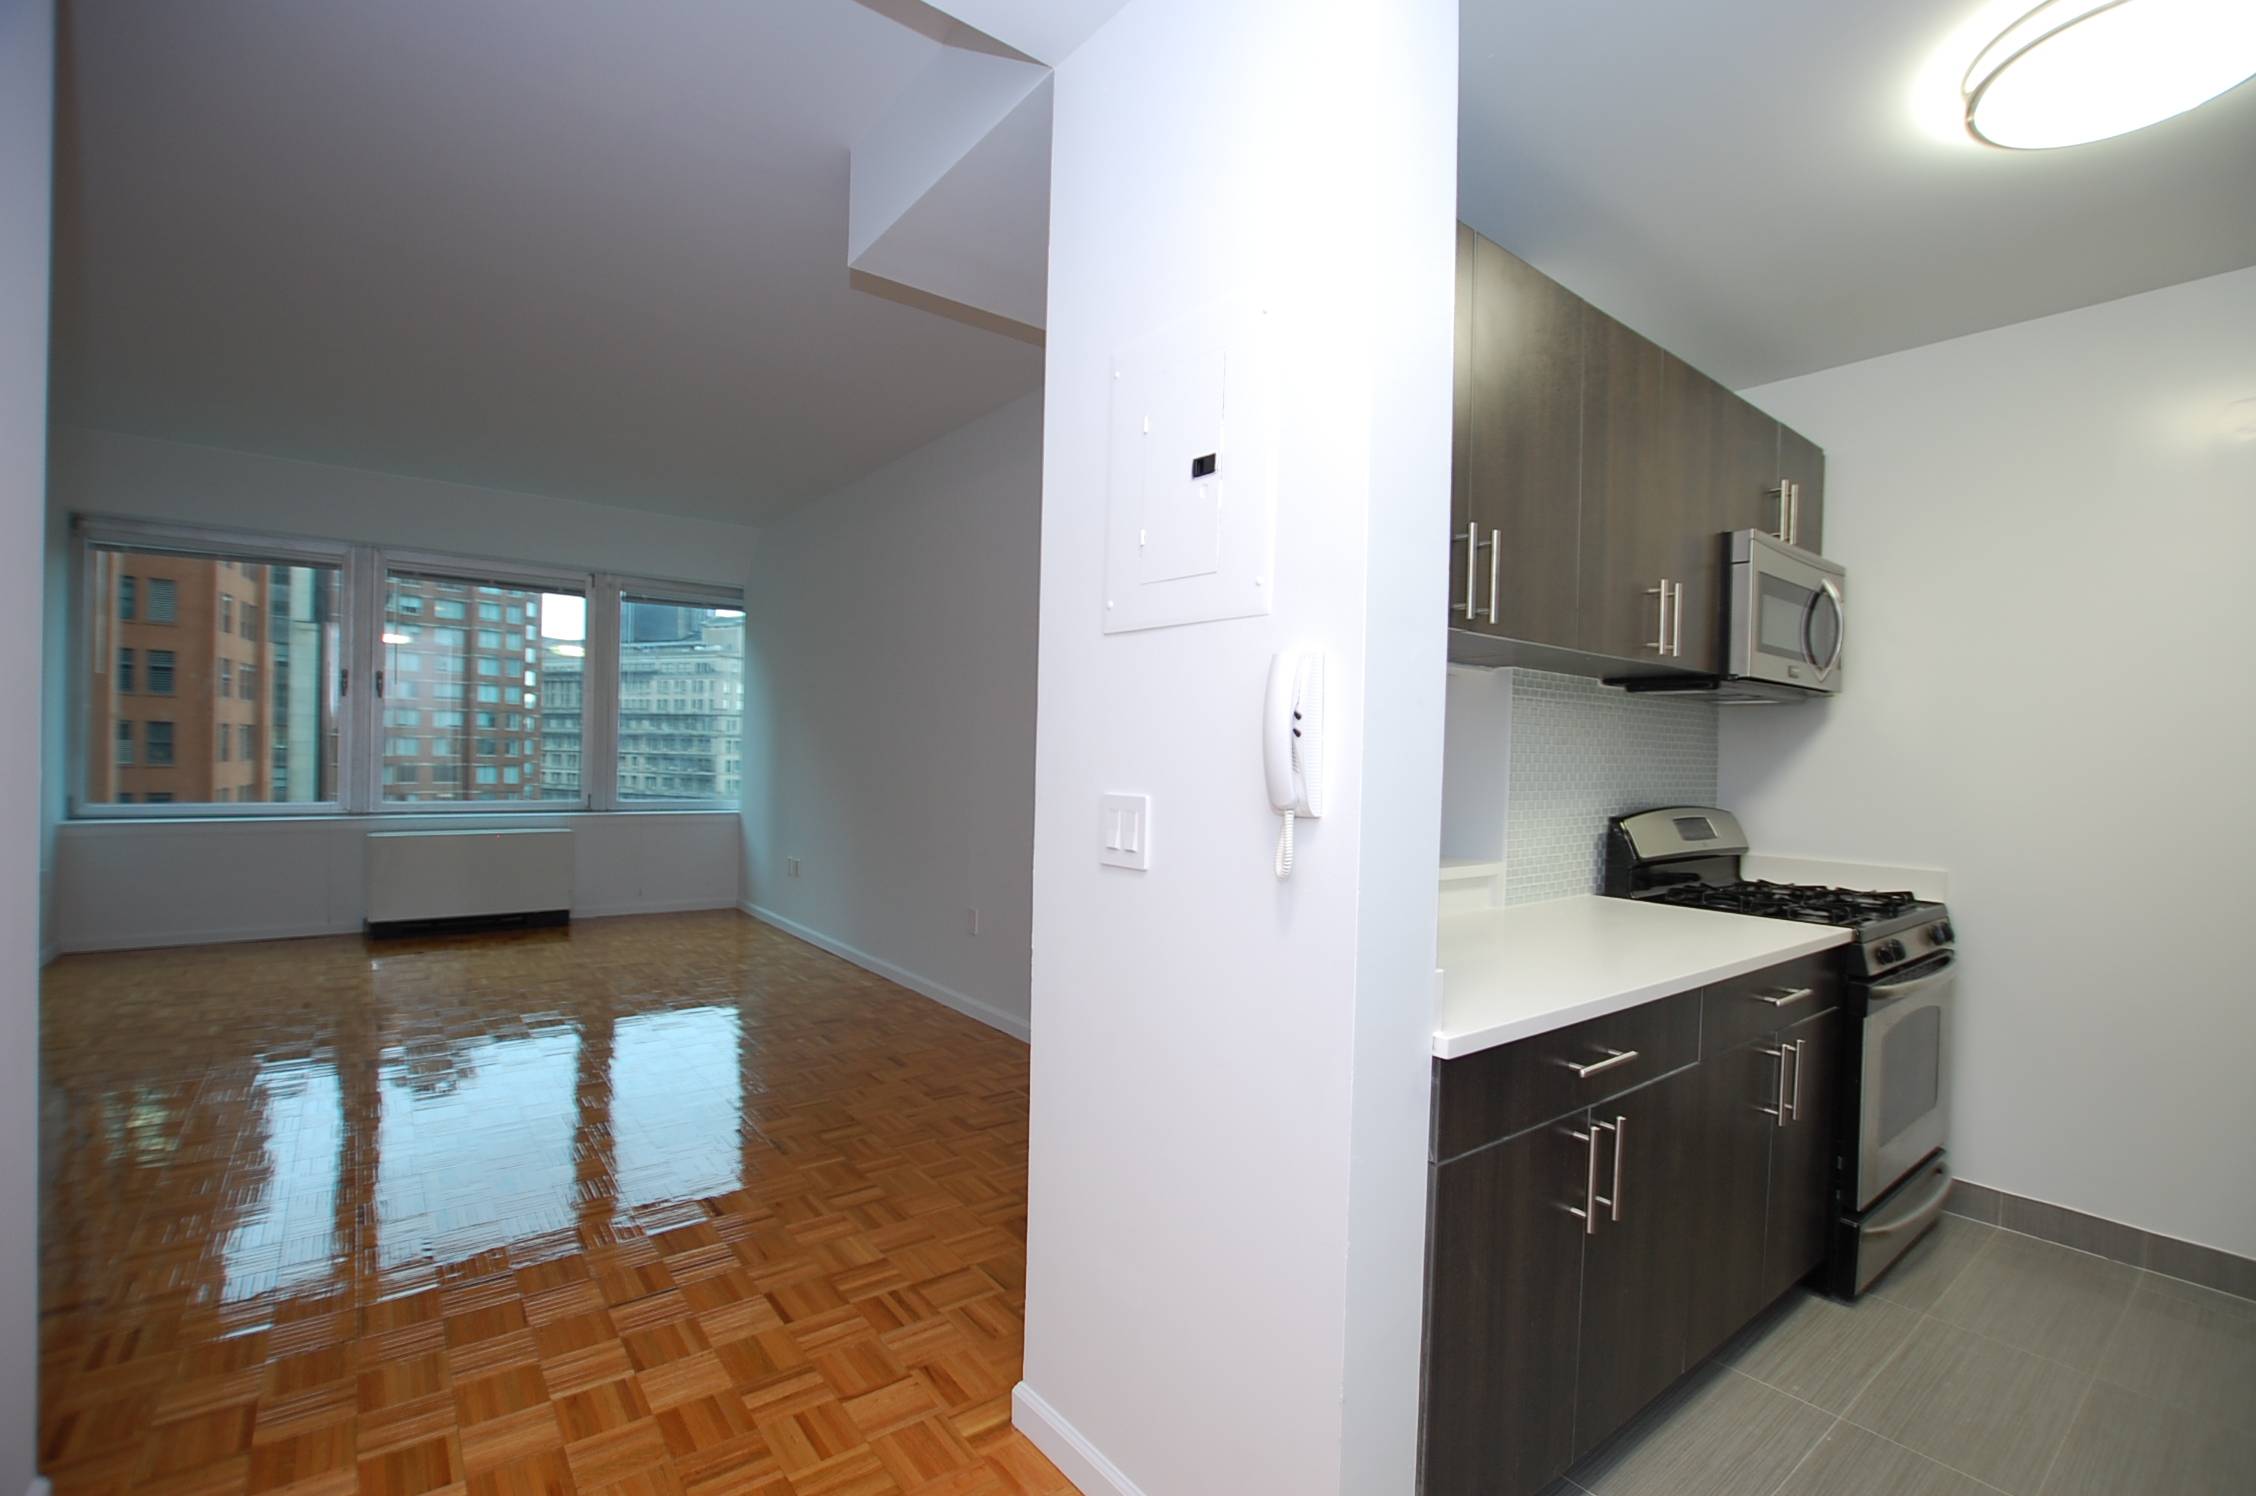 NYC - Financial District * NO FEE Apartment for Rent * NEW Renovations * Breathtaking Skyline Views * - 3B/2B - $5100 / month